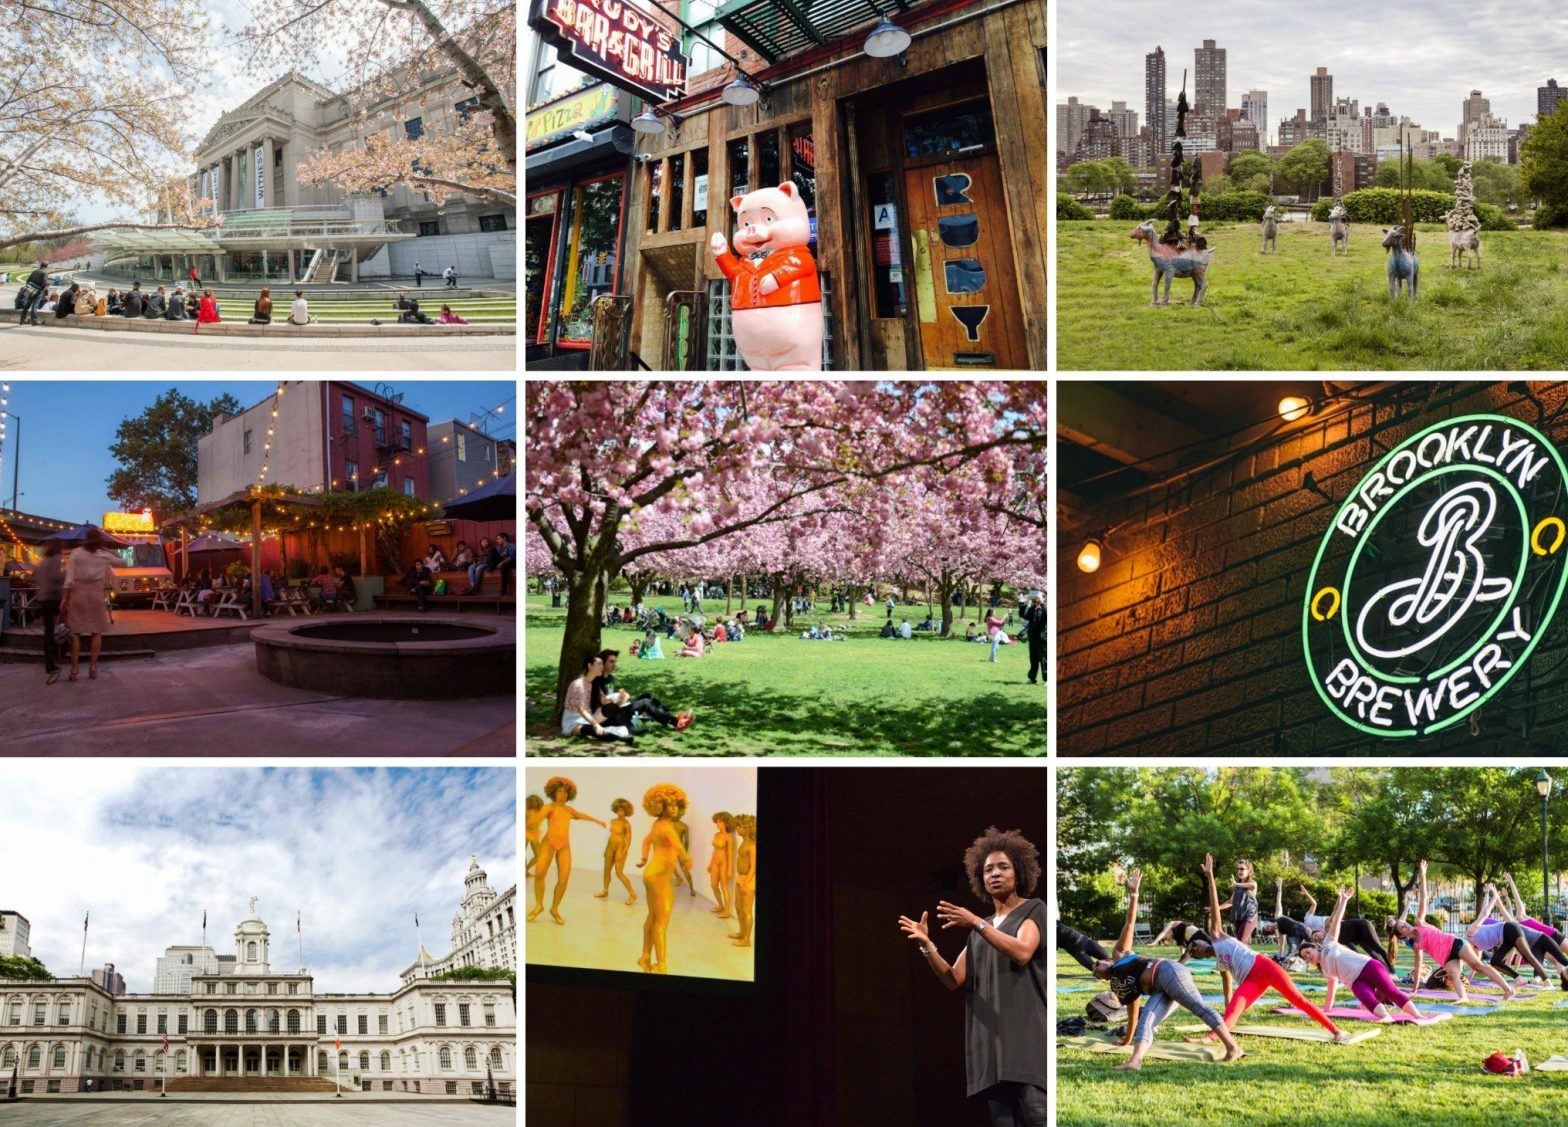 The 10 Best Outdoor Activities in New York During COVID-19